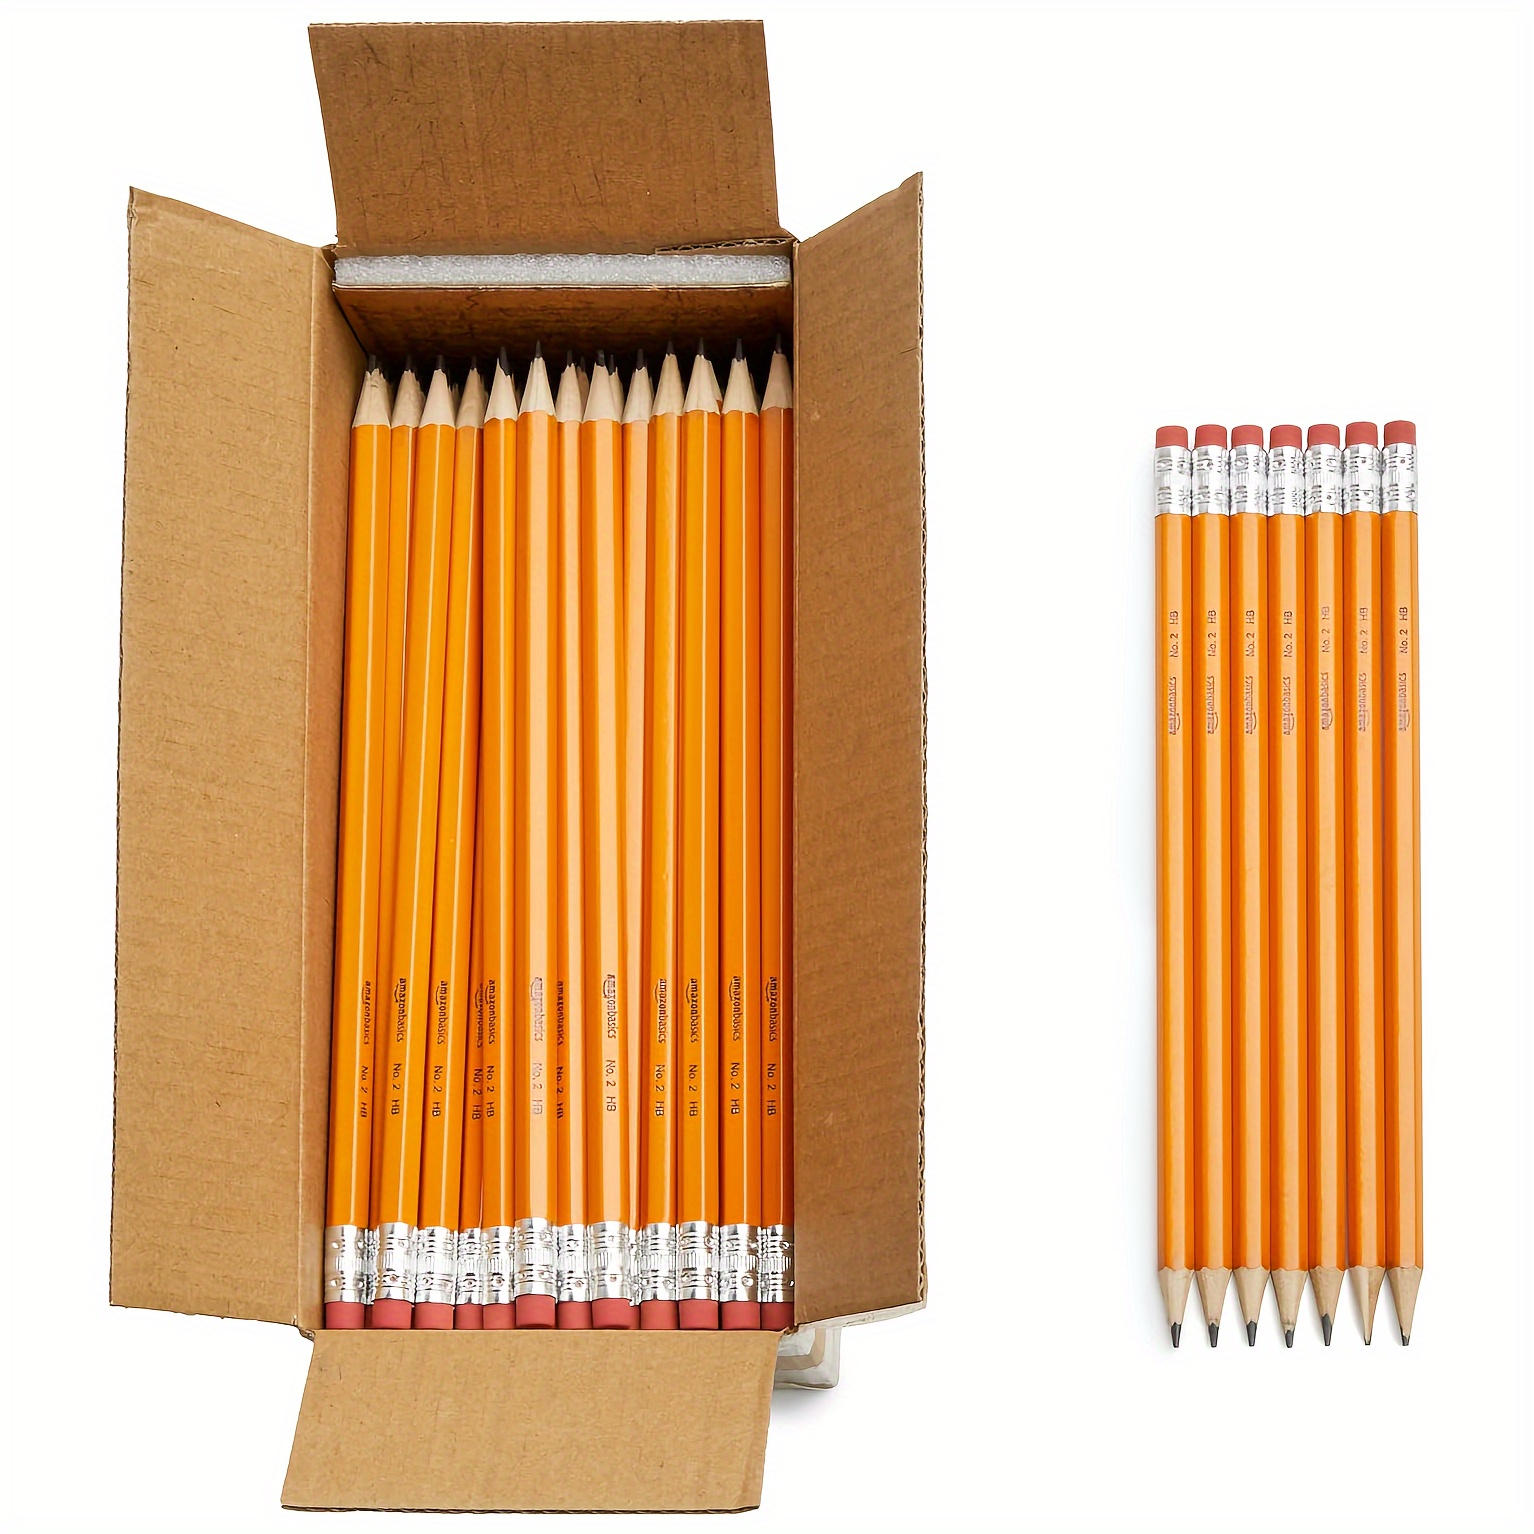 

30/50/150sticks, Hb Pencils, Yellow Pencils For Office And Classroom Supplies, Drawing Pencils, Writing Sketch Drawing Learning Stationery Pencils, Stationery Supplies, Back-to-school Supplies